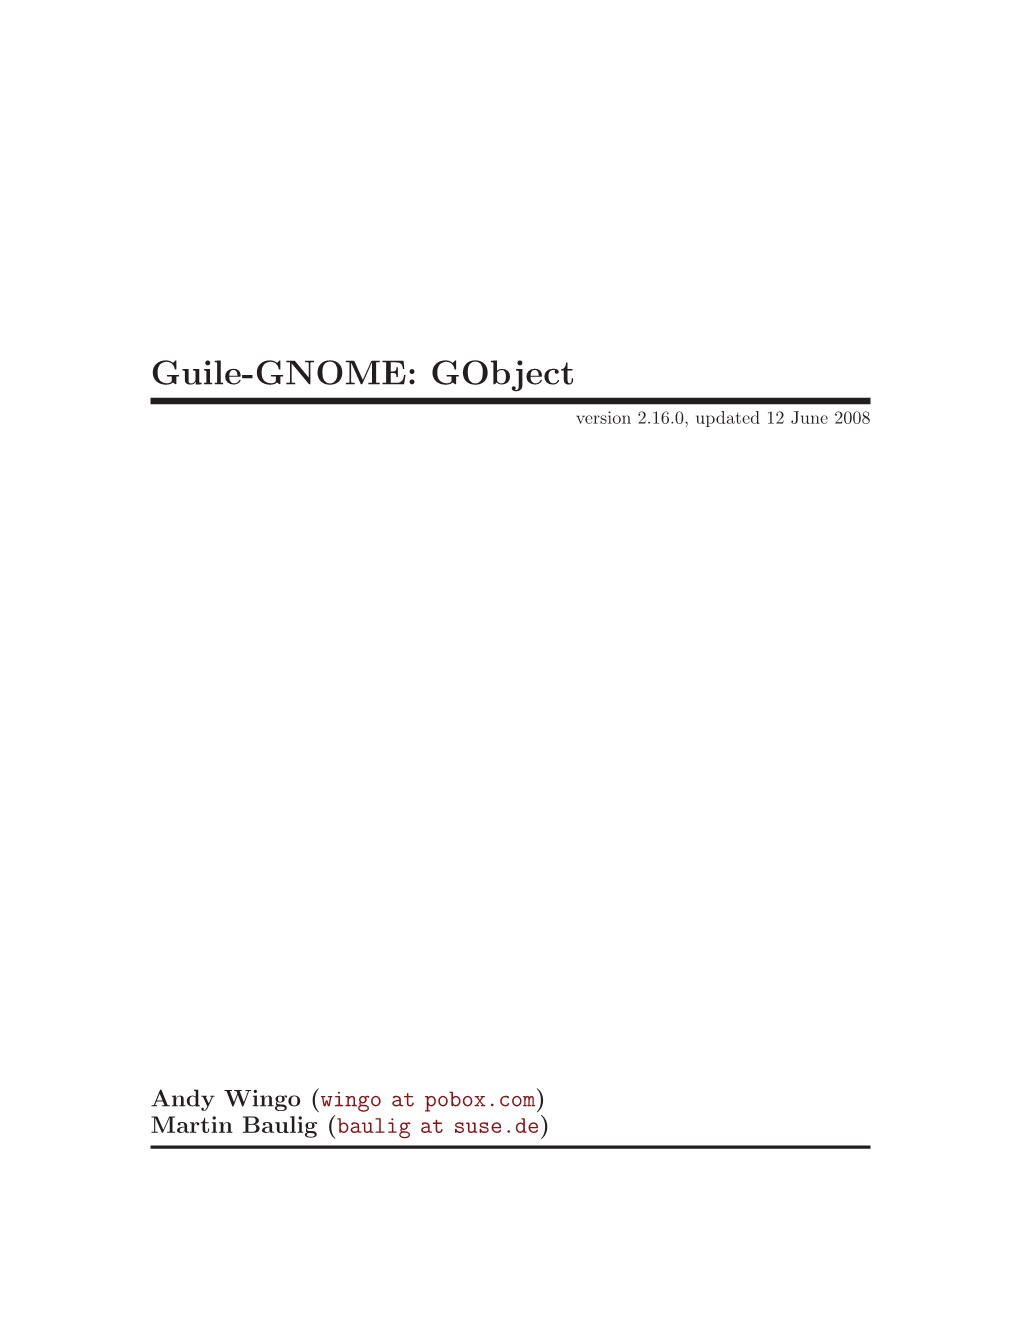 Guile-Gnome-Gobject.Pdf